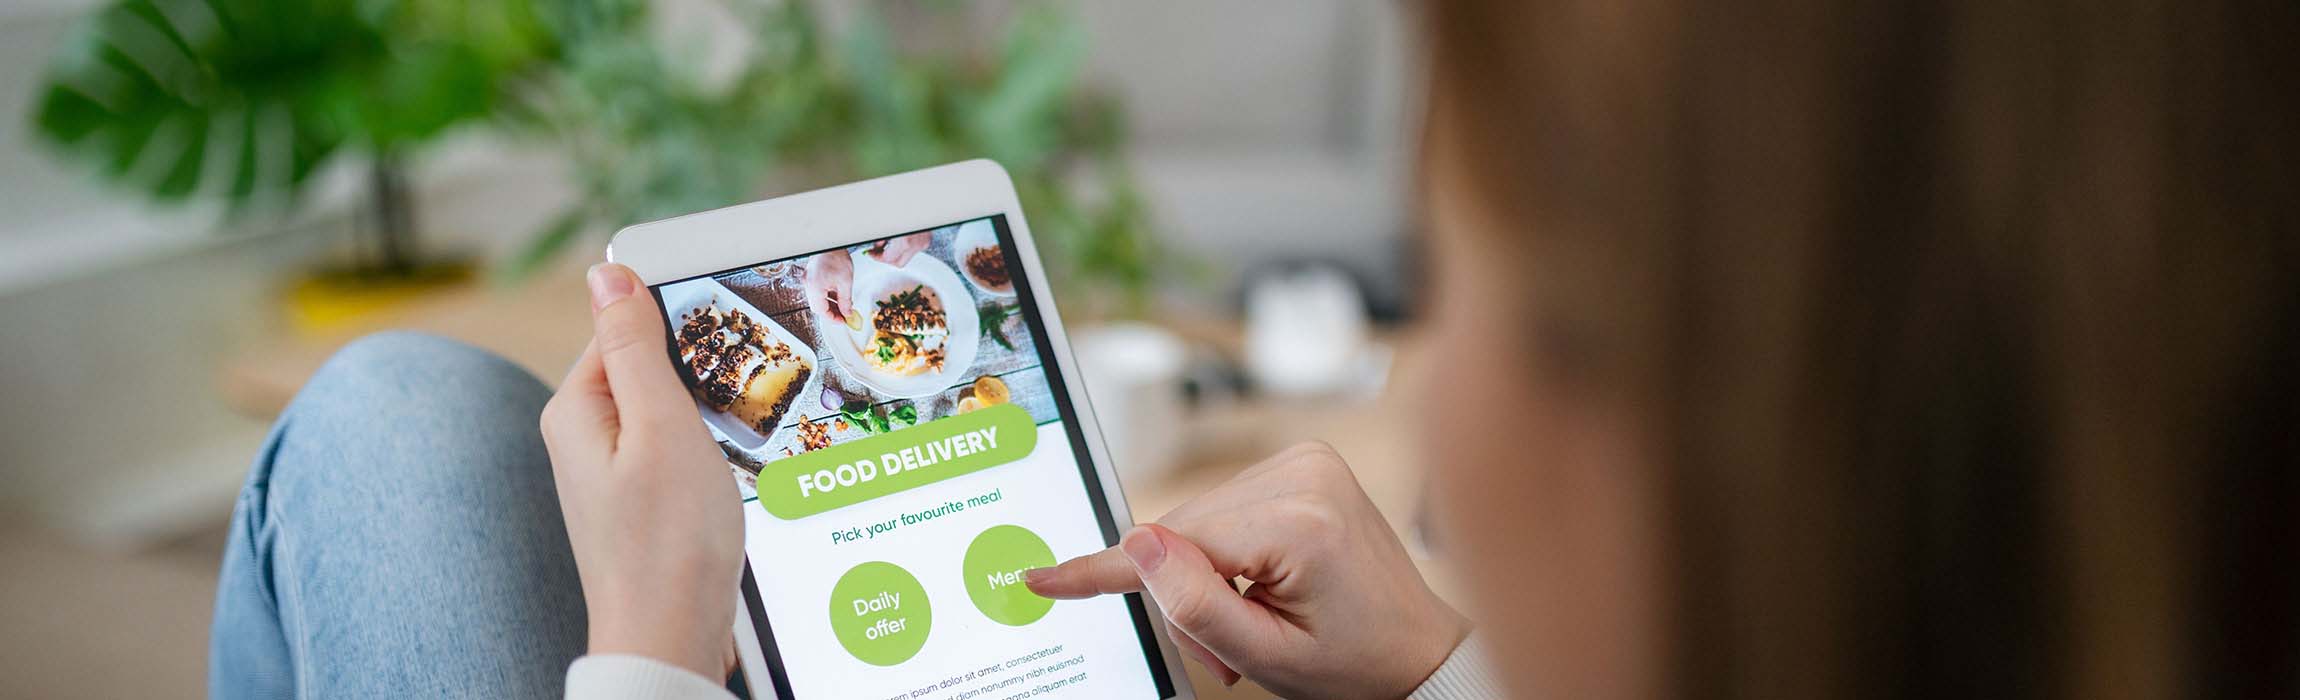 Quick Commerce: The number of specialists for food ordered online and delivered quickly is growing rapidly.